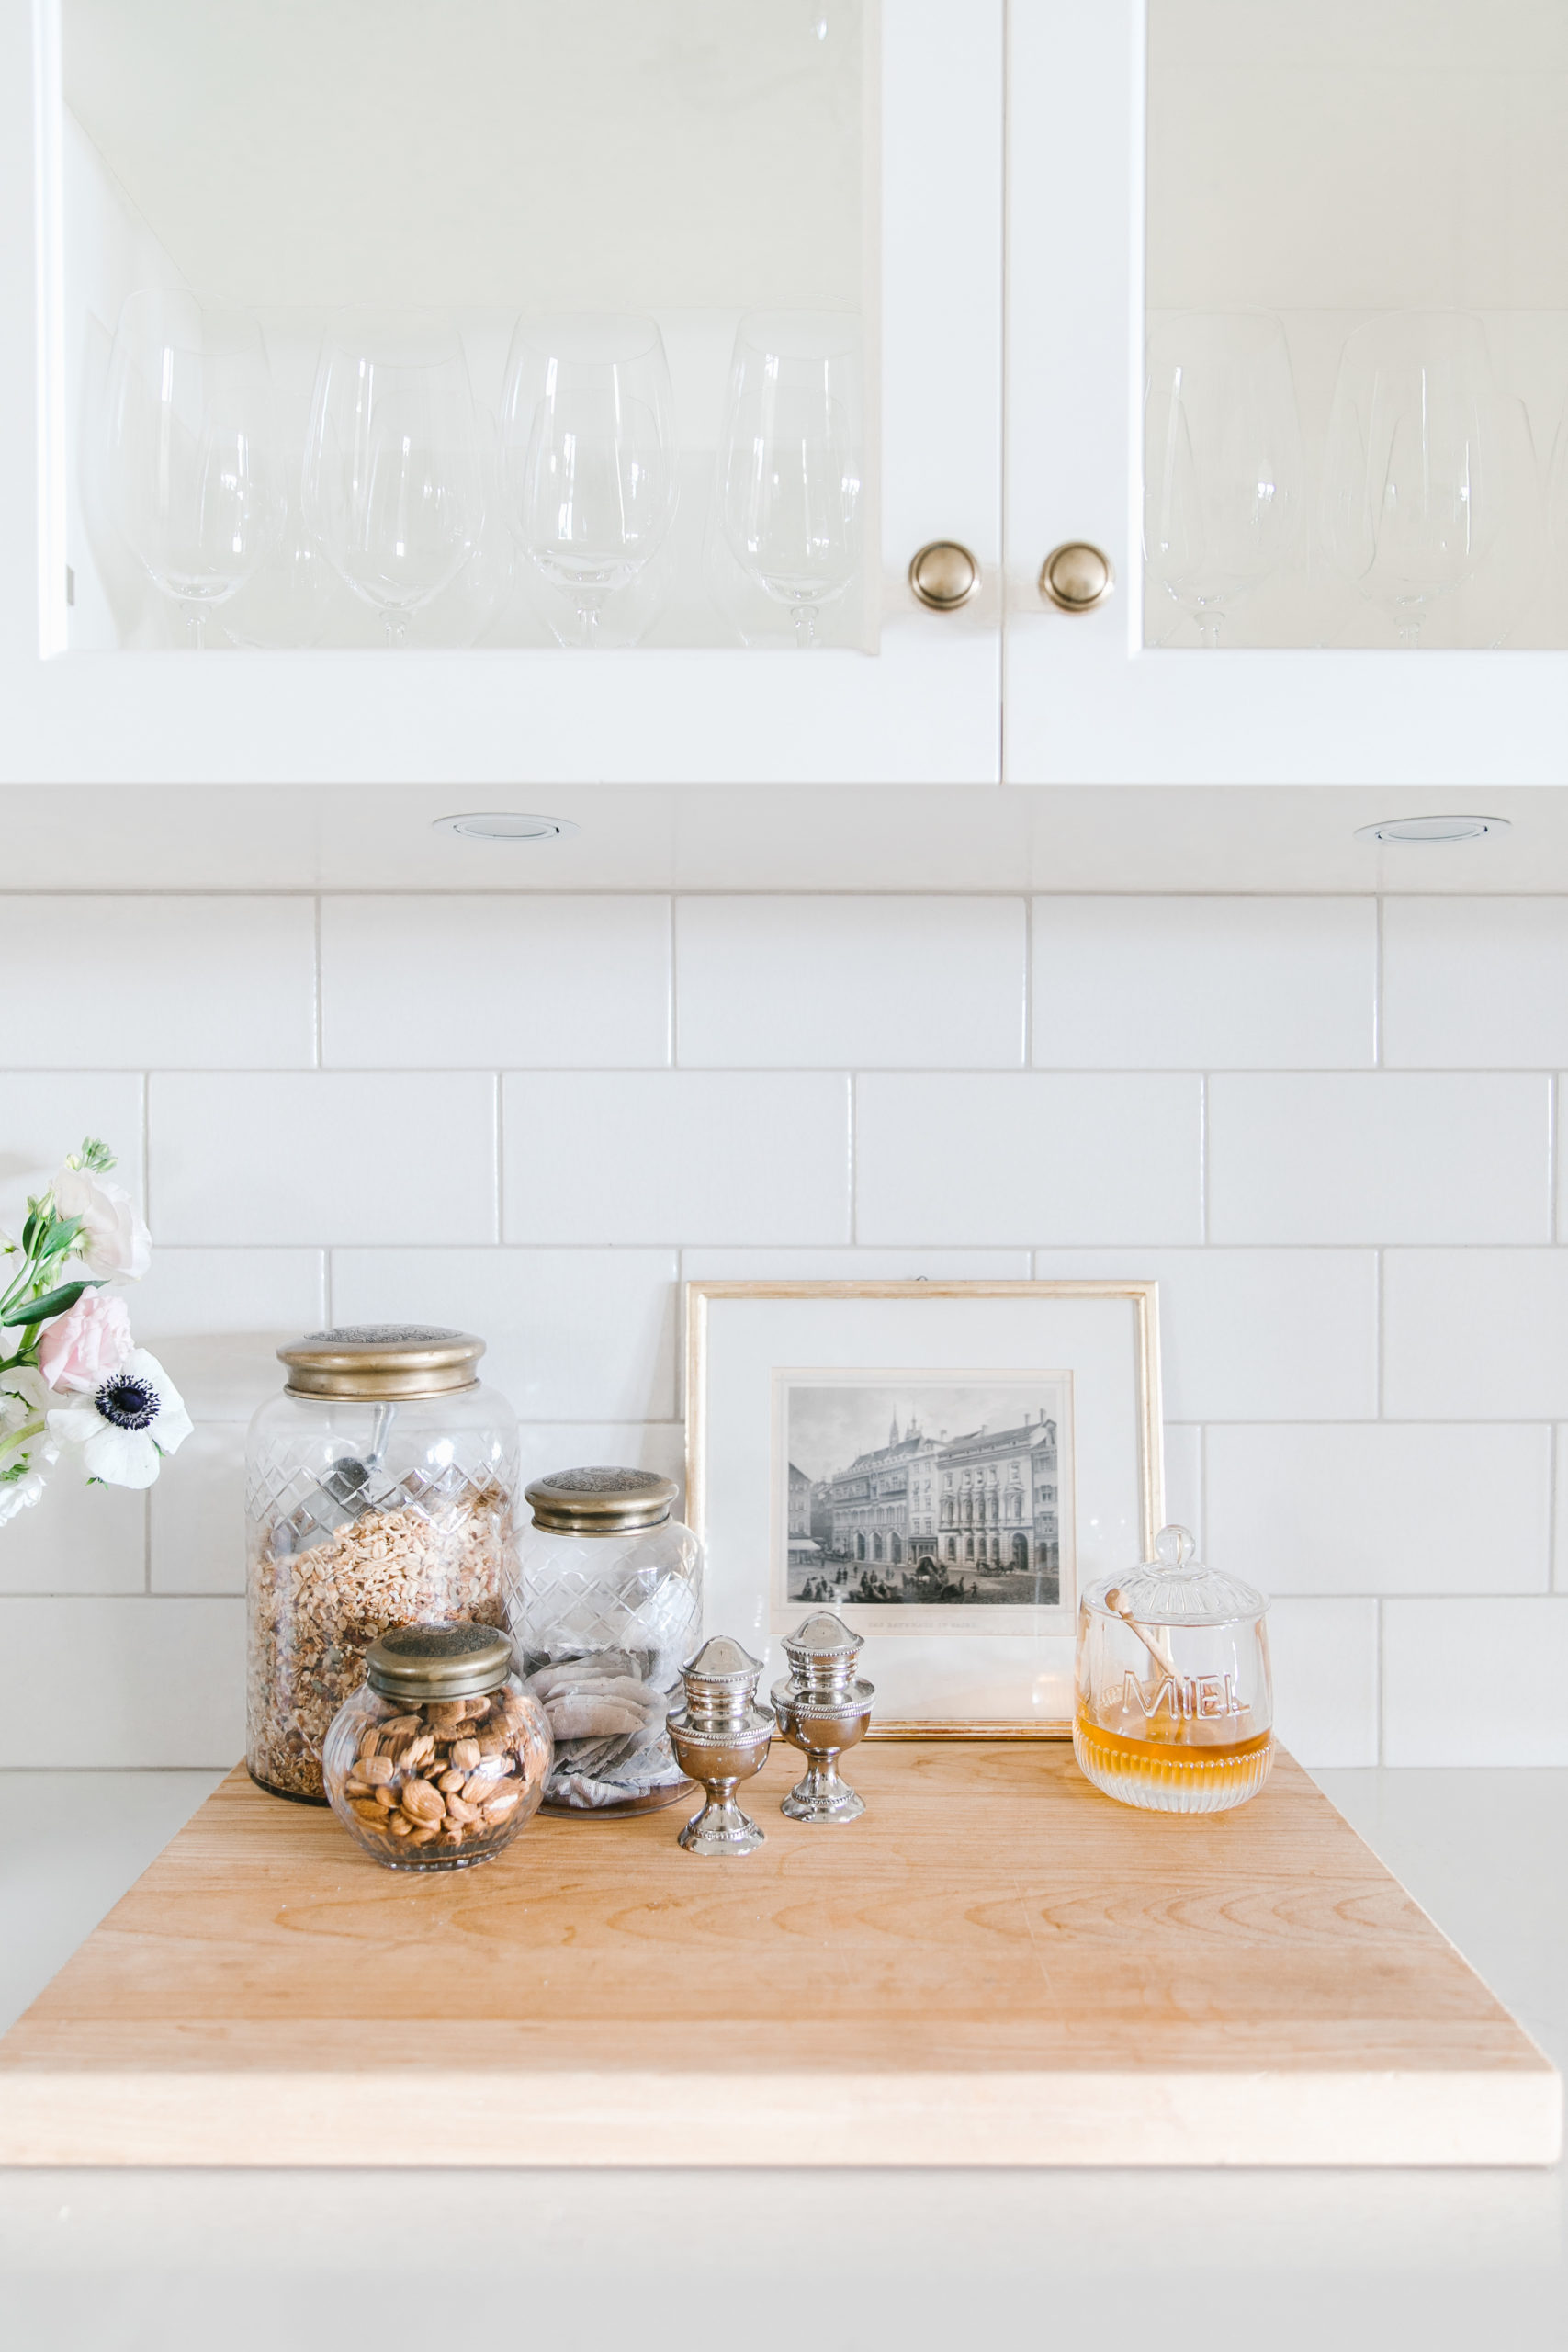 We're revealing our Pantry design and how we've organized everything! We found inspiration in so many things and are so happy with how it's all come together!